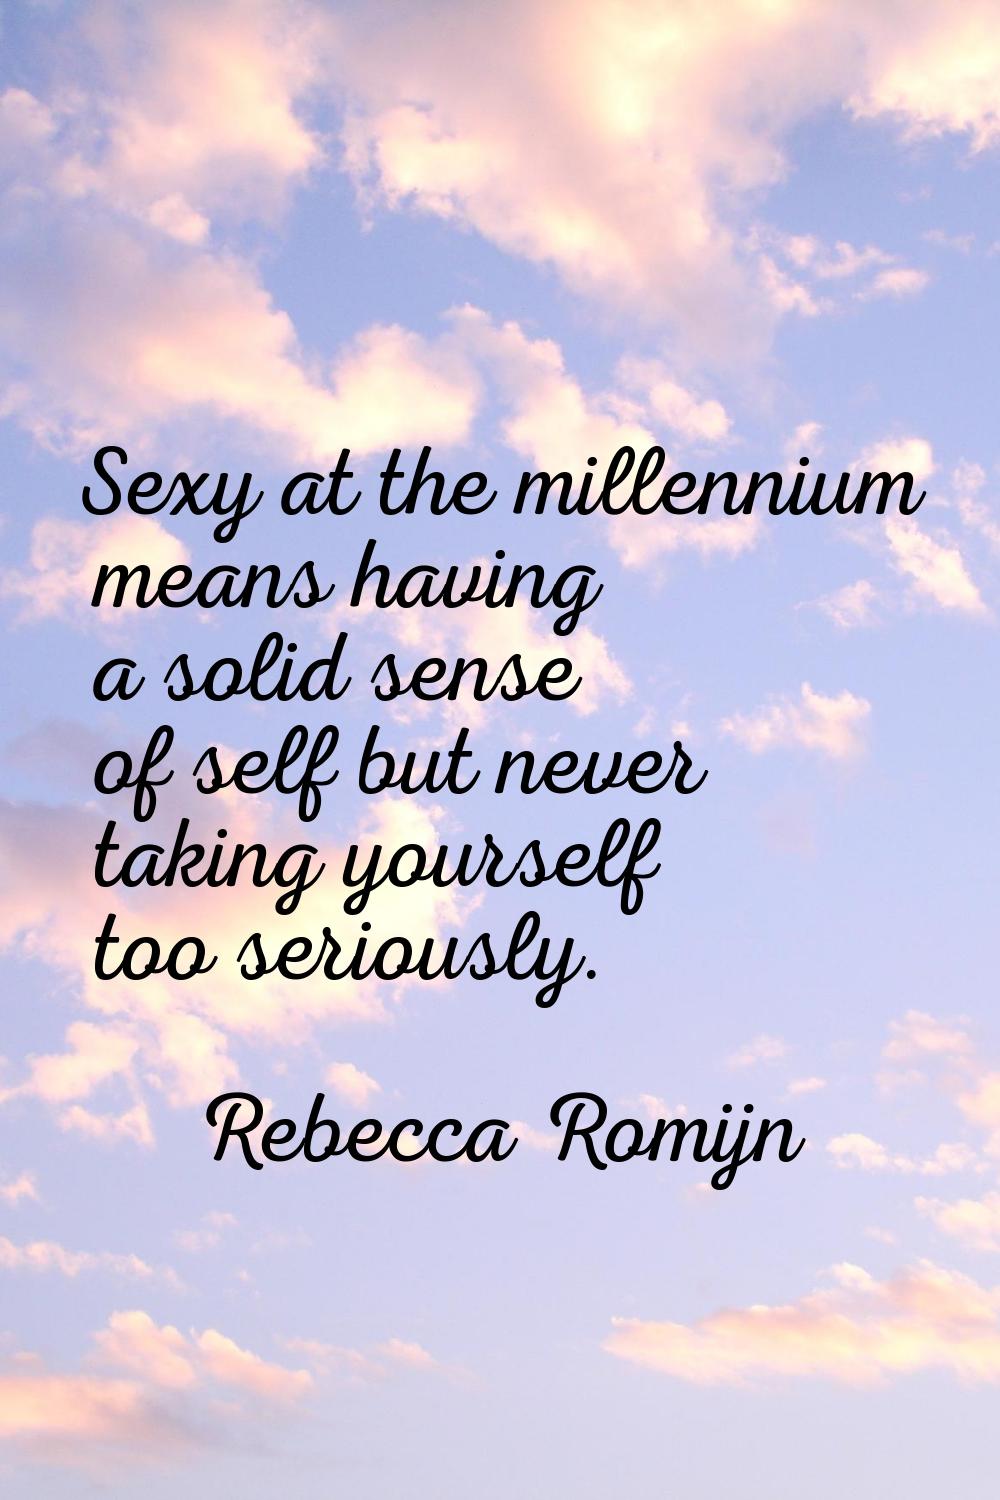 Sexy at the millennium means having a solid sense of self but never taking yourself too seriously.